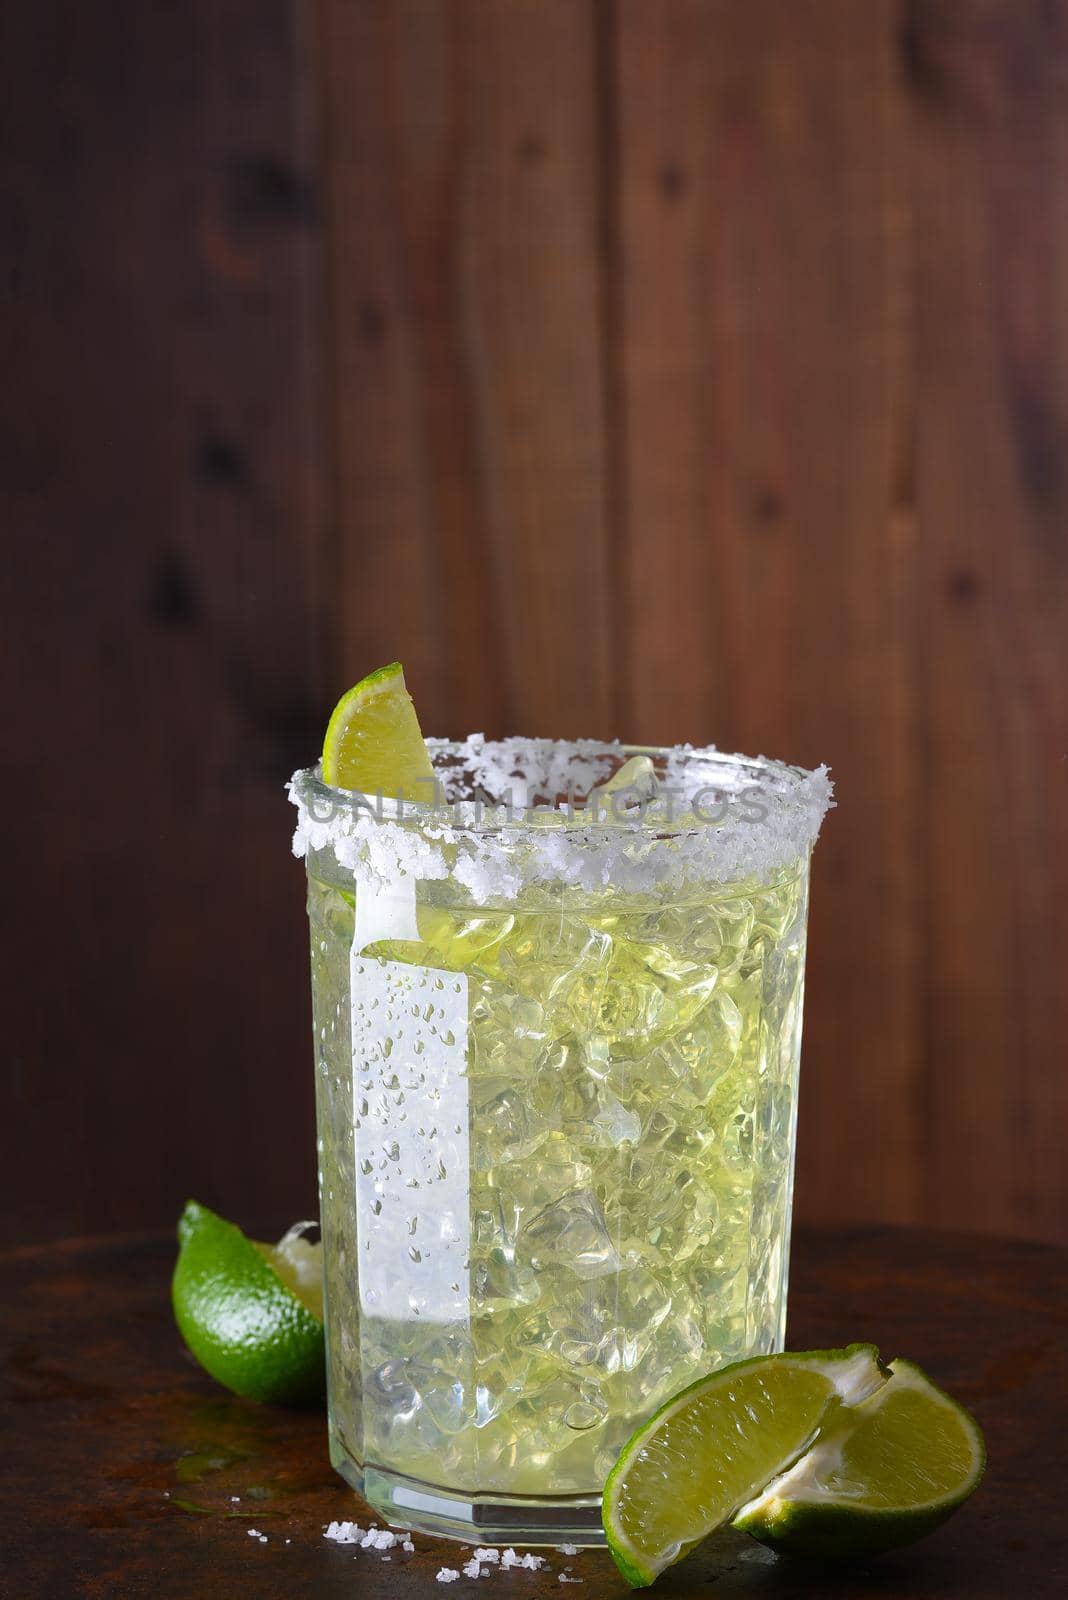 A margarita on the rocks in a glass tumbler. The rim of the glass is encrusted in salt and sliced limes are on the bar surface.